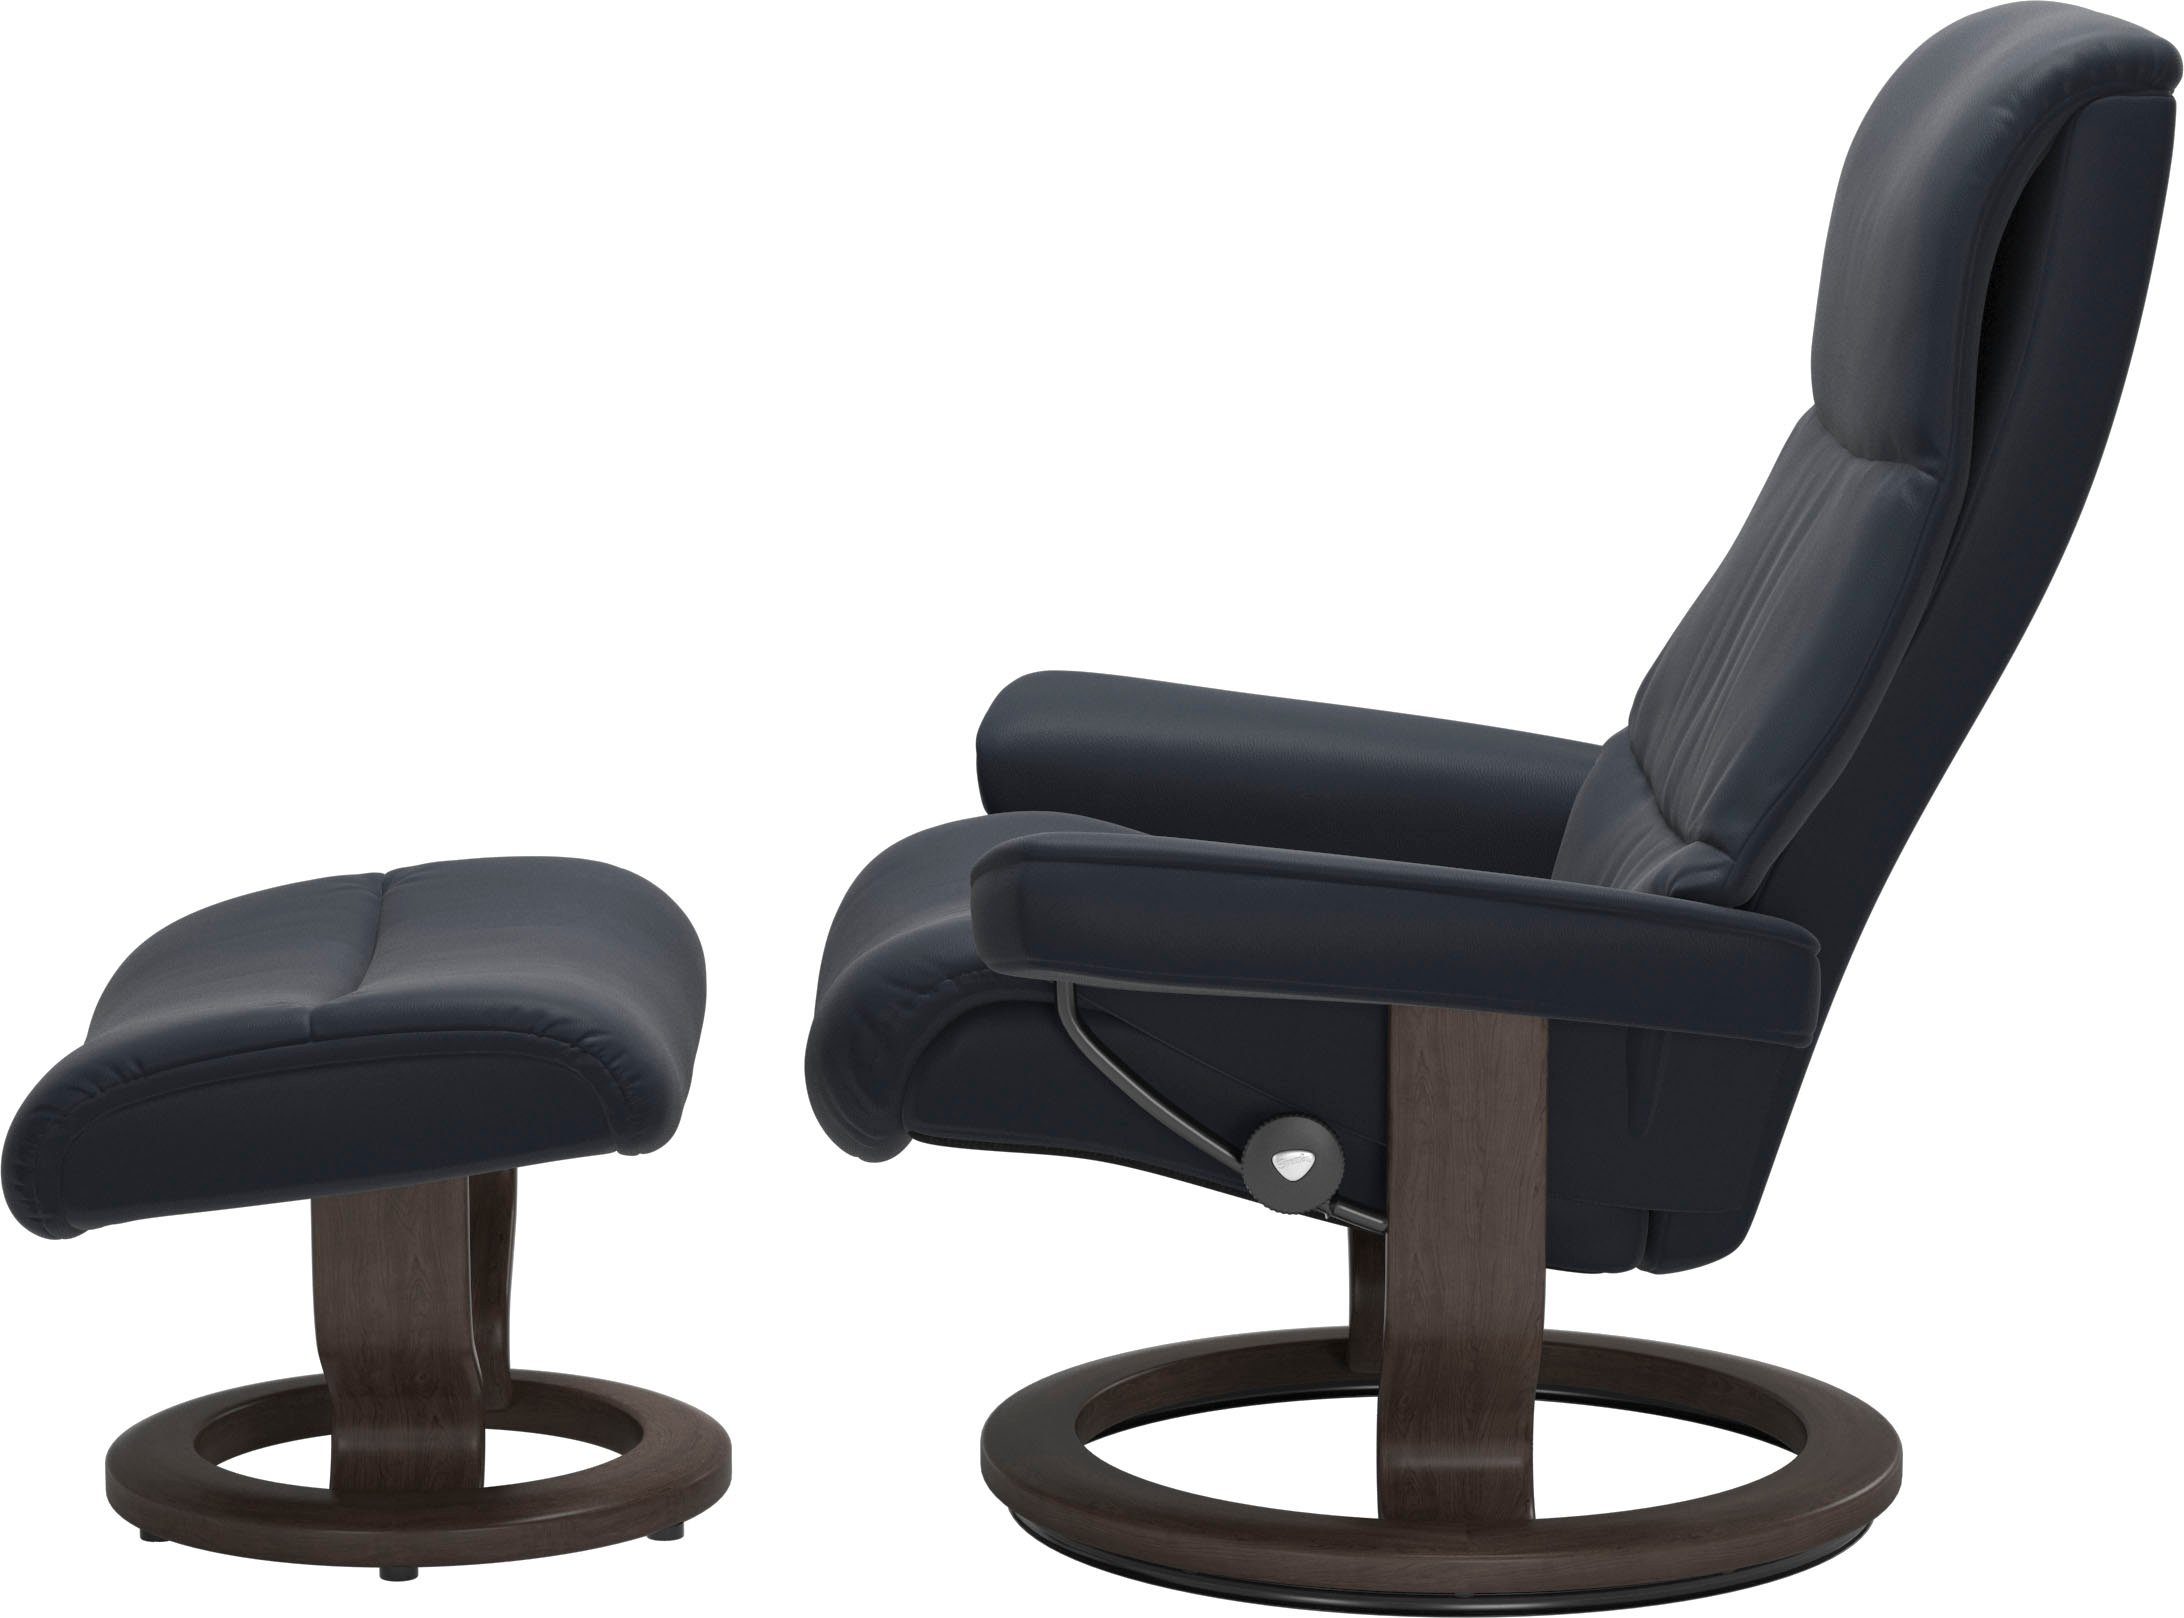 Classic Stressless® Größe mit S,Gestell Wenge View, Base, Relaxsessel